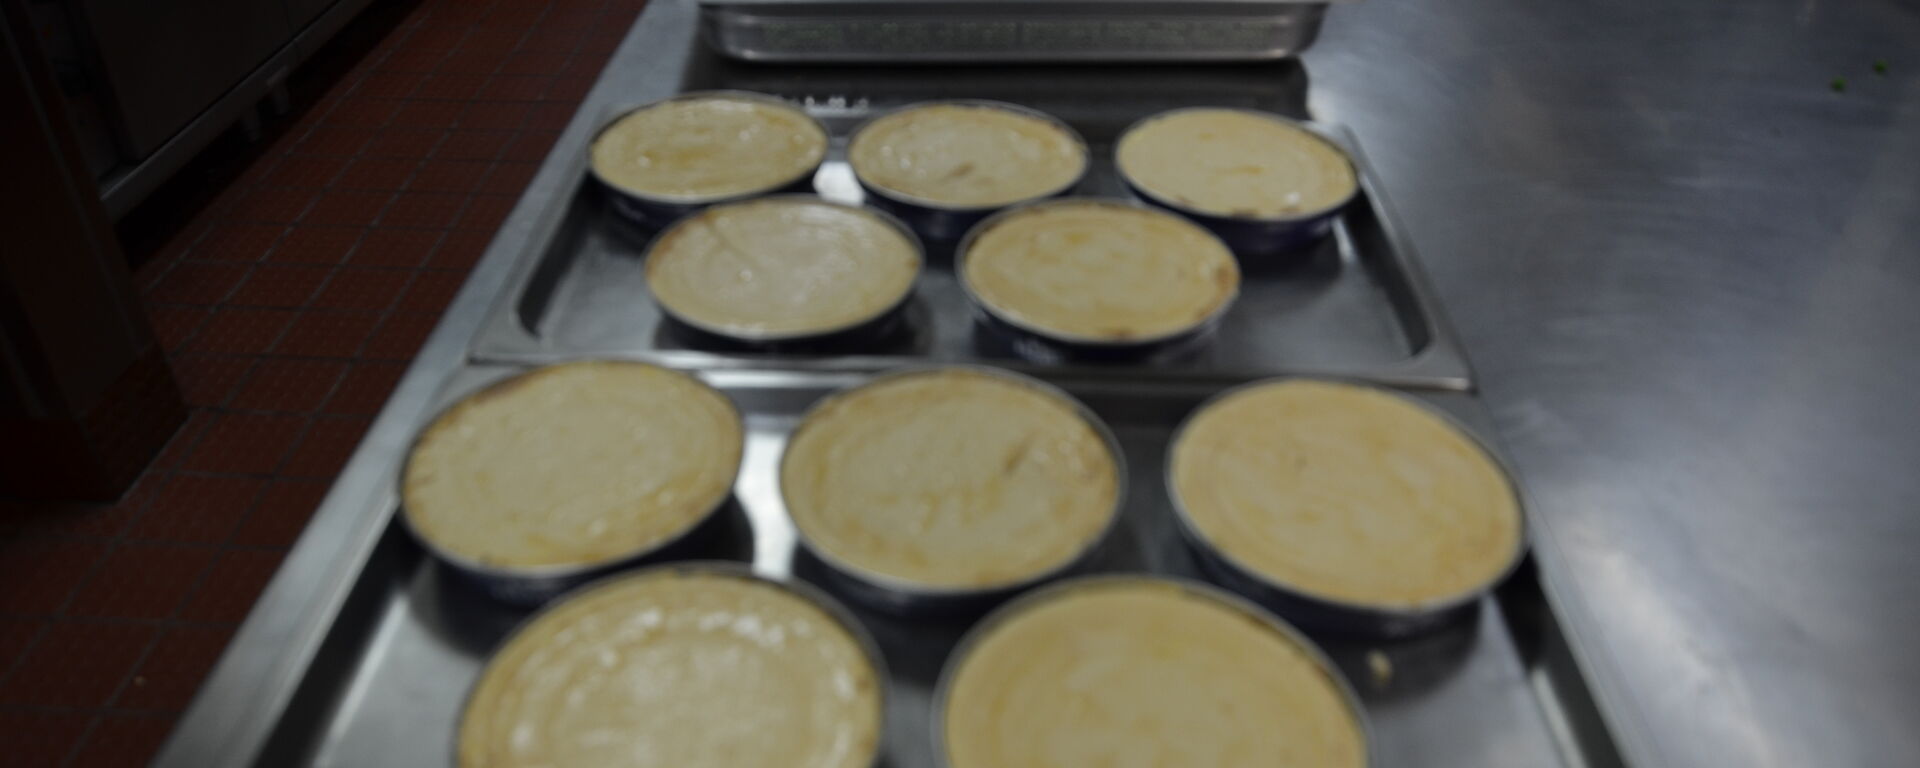 Pies before cooking in the Kitchen